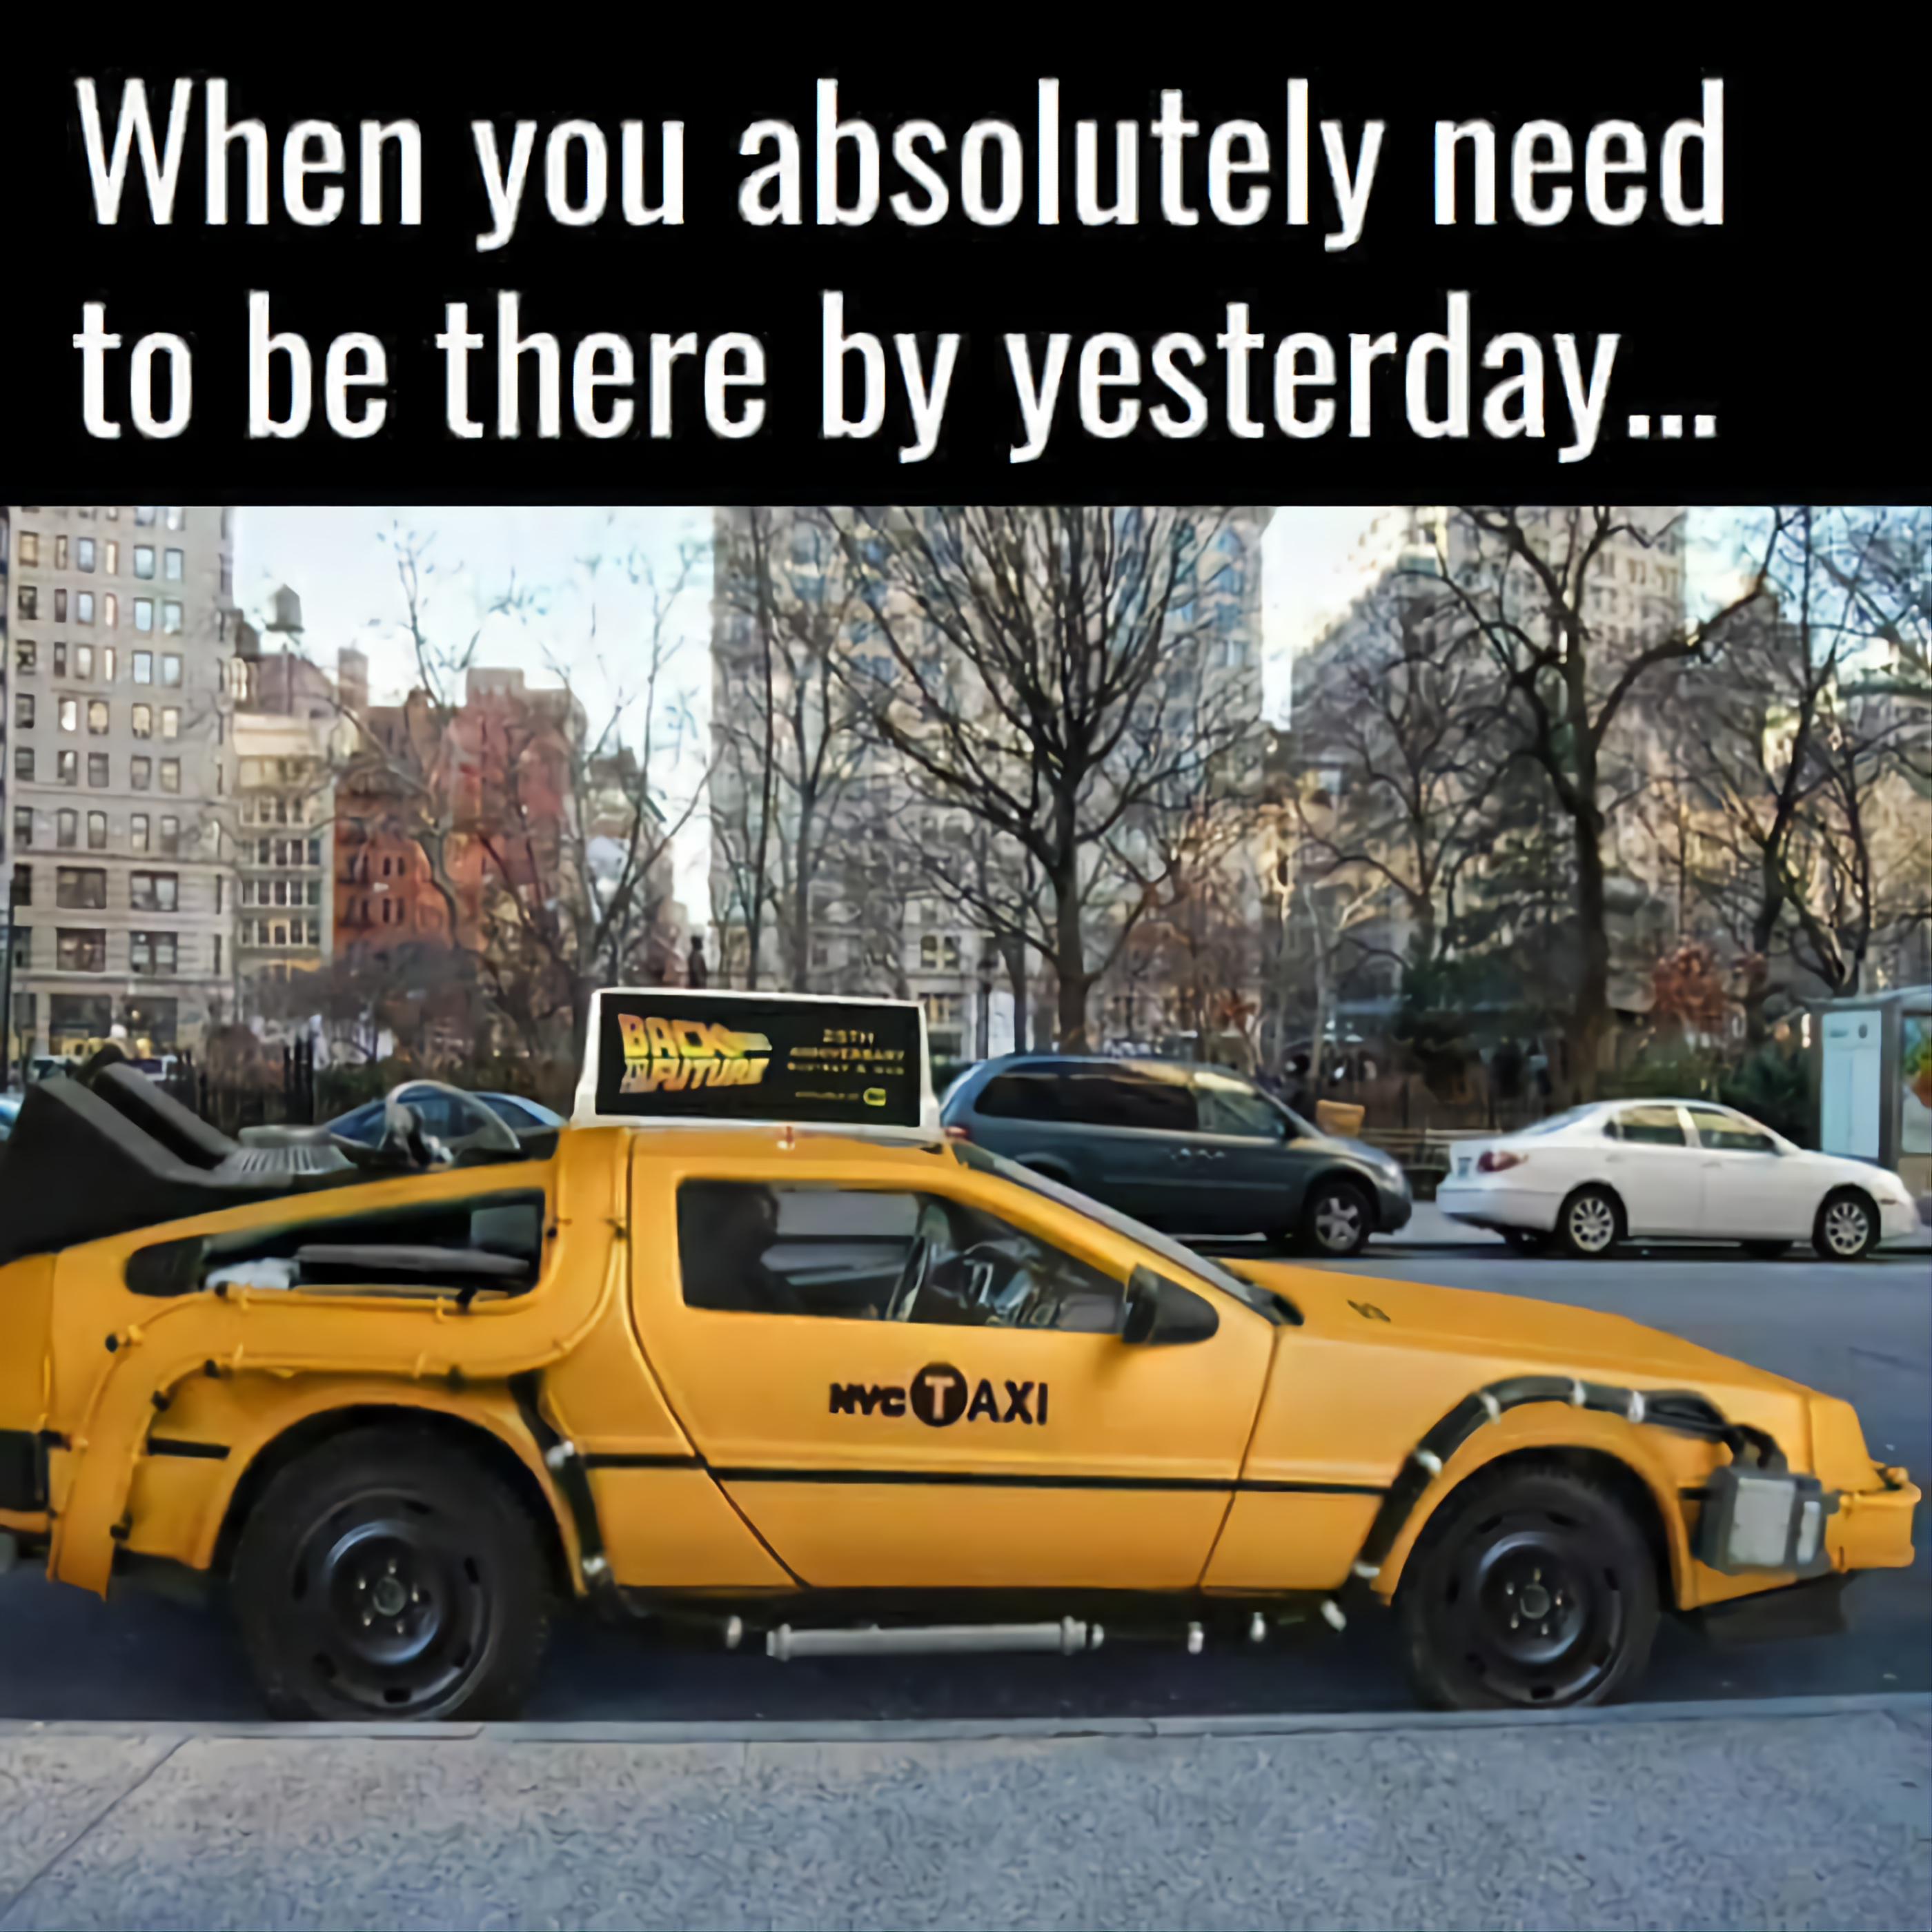 delorean nyc taxi - When you absolutely need to be there by yesterday... Back Mat Mvc Taxi